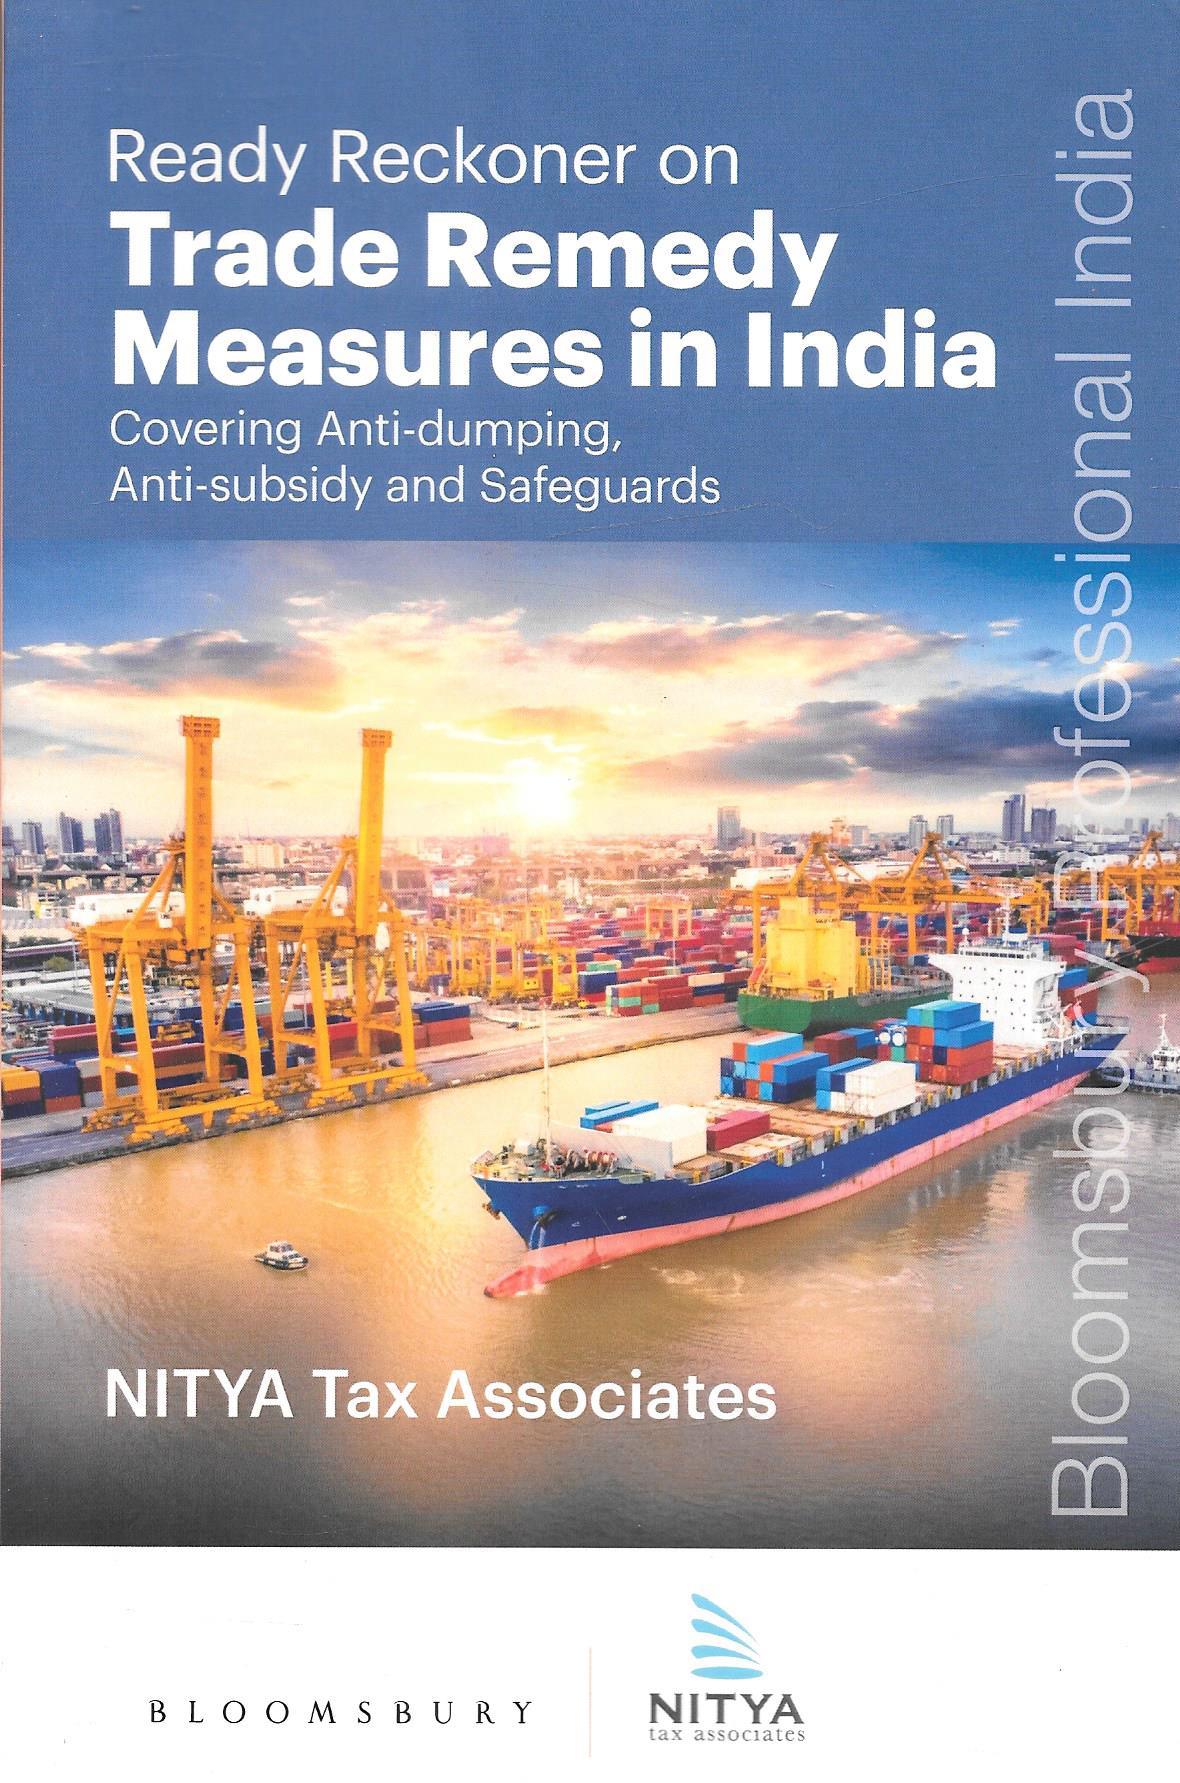 Ready Reckoner on Trade Remedy Measures in India